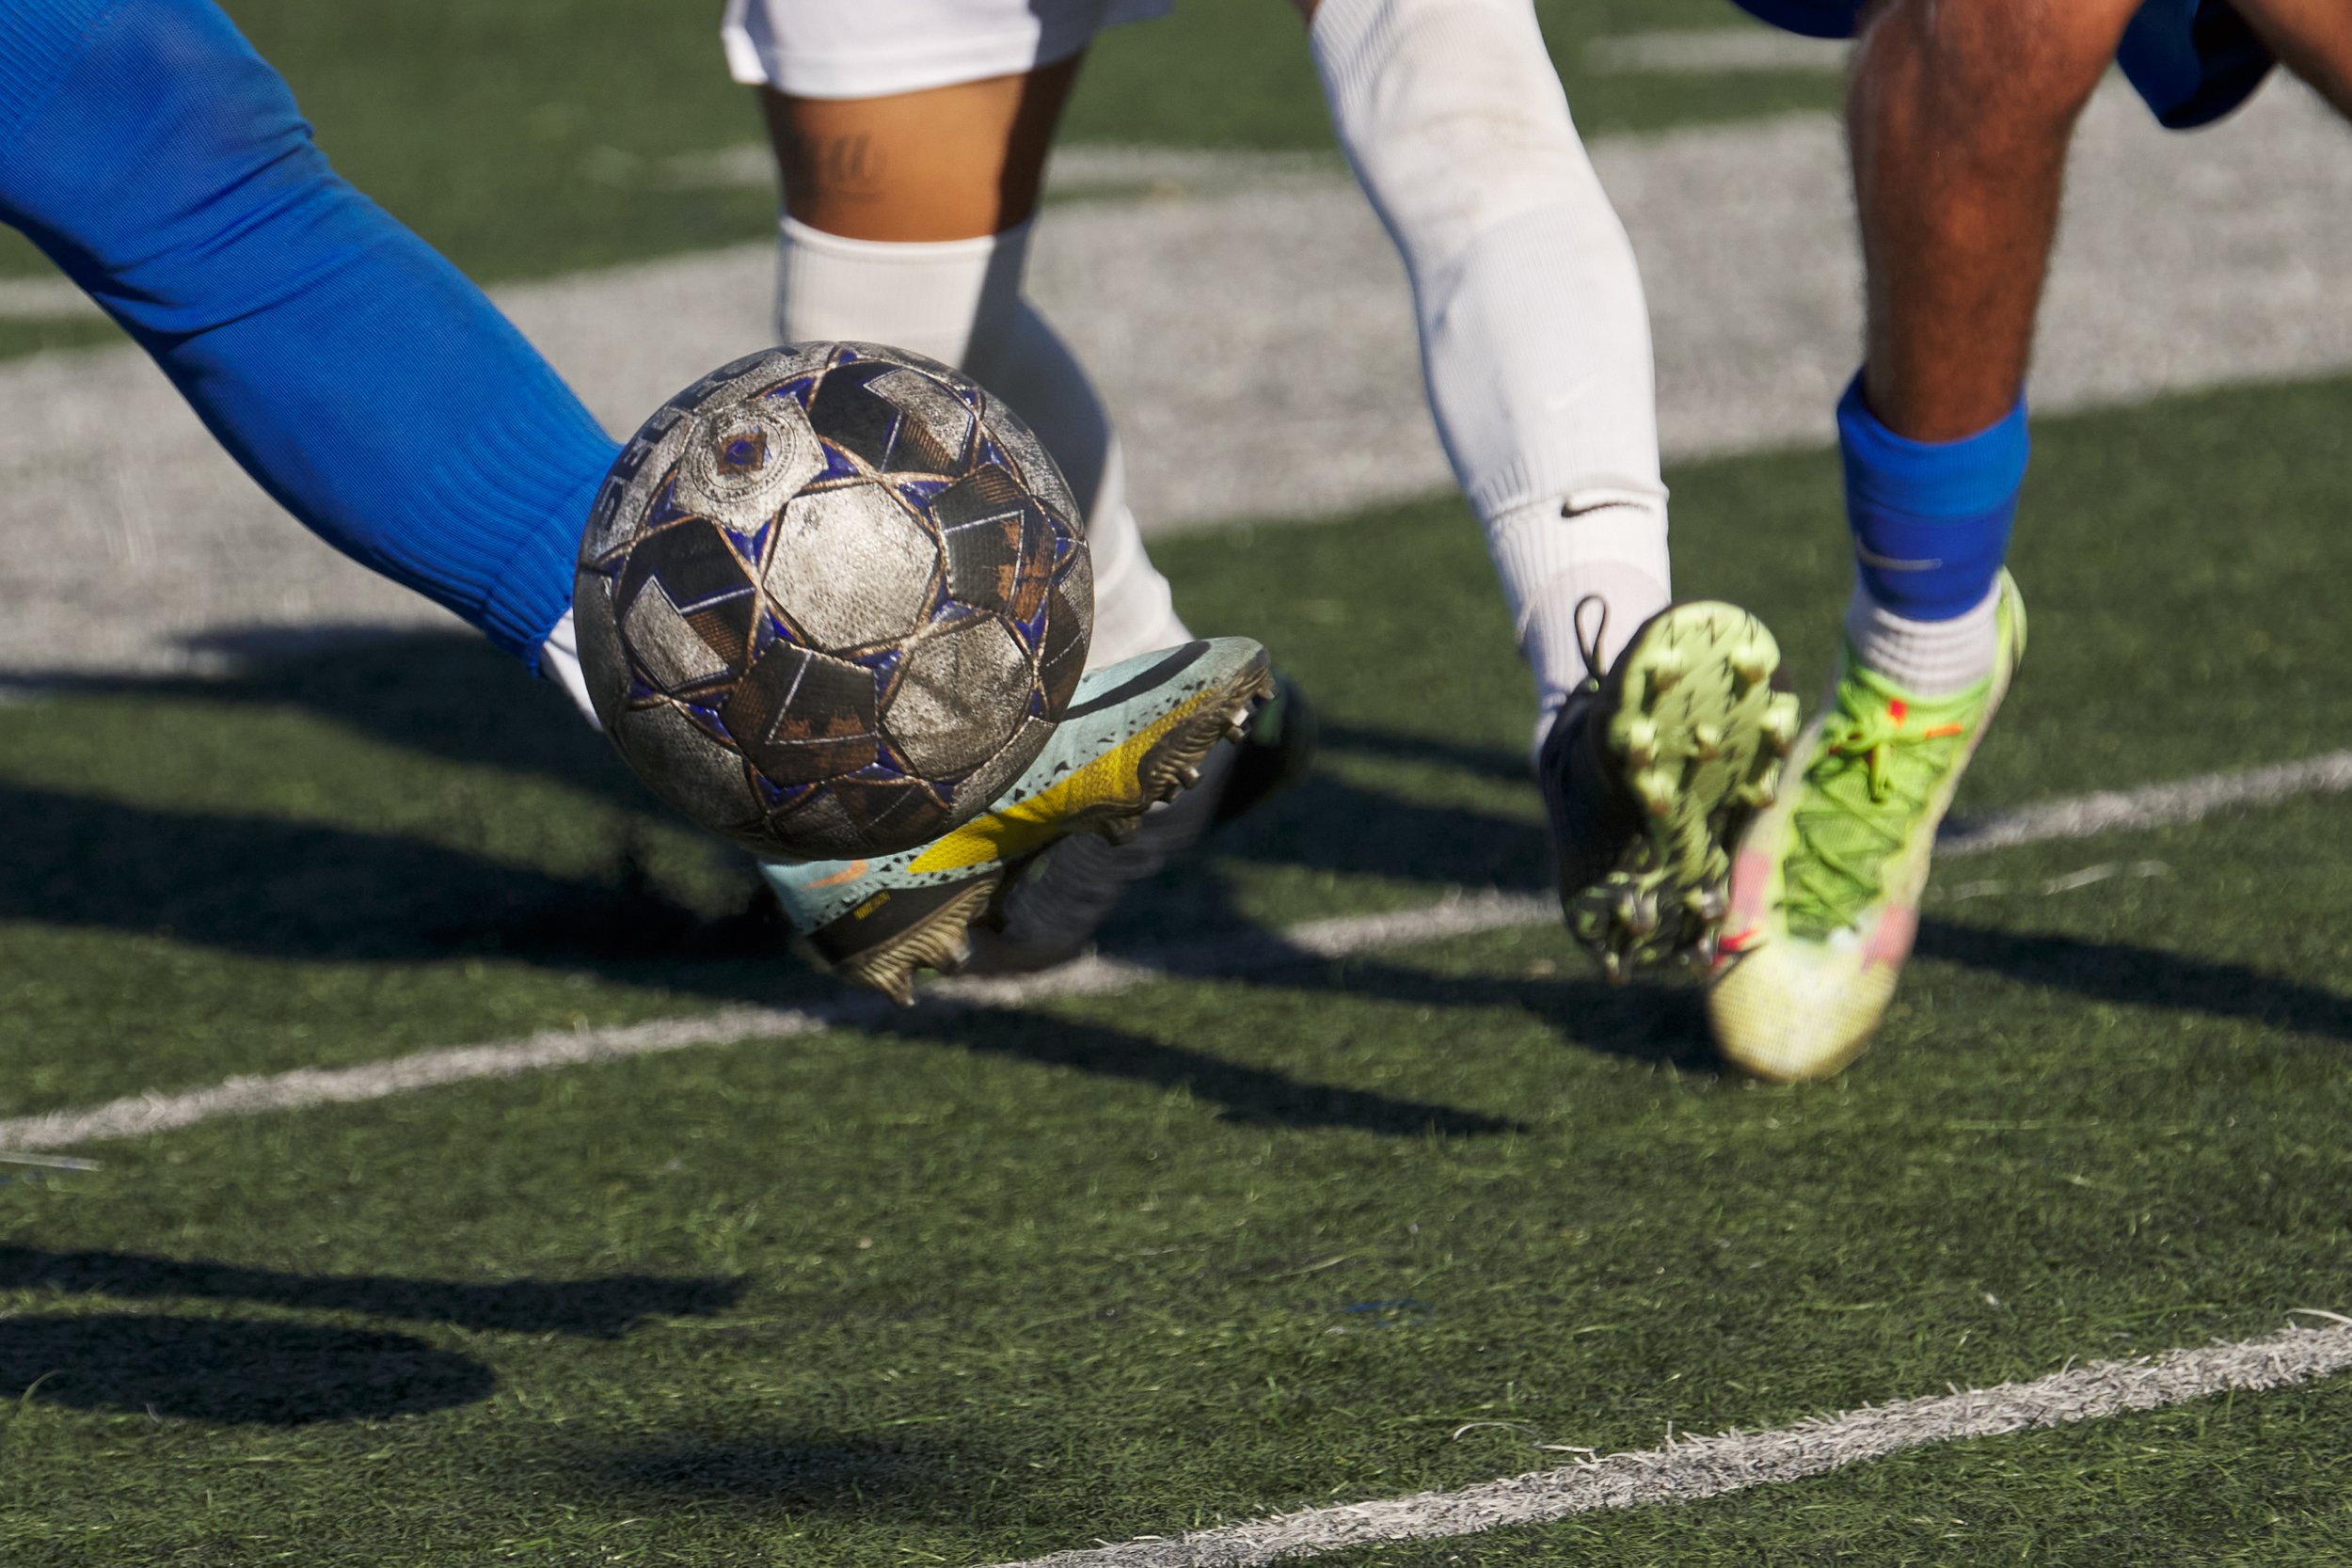  A closeup of players' legs and the ball during the men's soccer match between the Santa Monica College Corsairs and the Rio Hondo College Roadrunners at Corsair Field on Friday, Sept. 23, 2022, in Santa Monica, Calif. (Nicholas McCall | The Corsair)